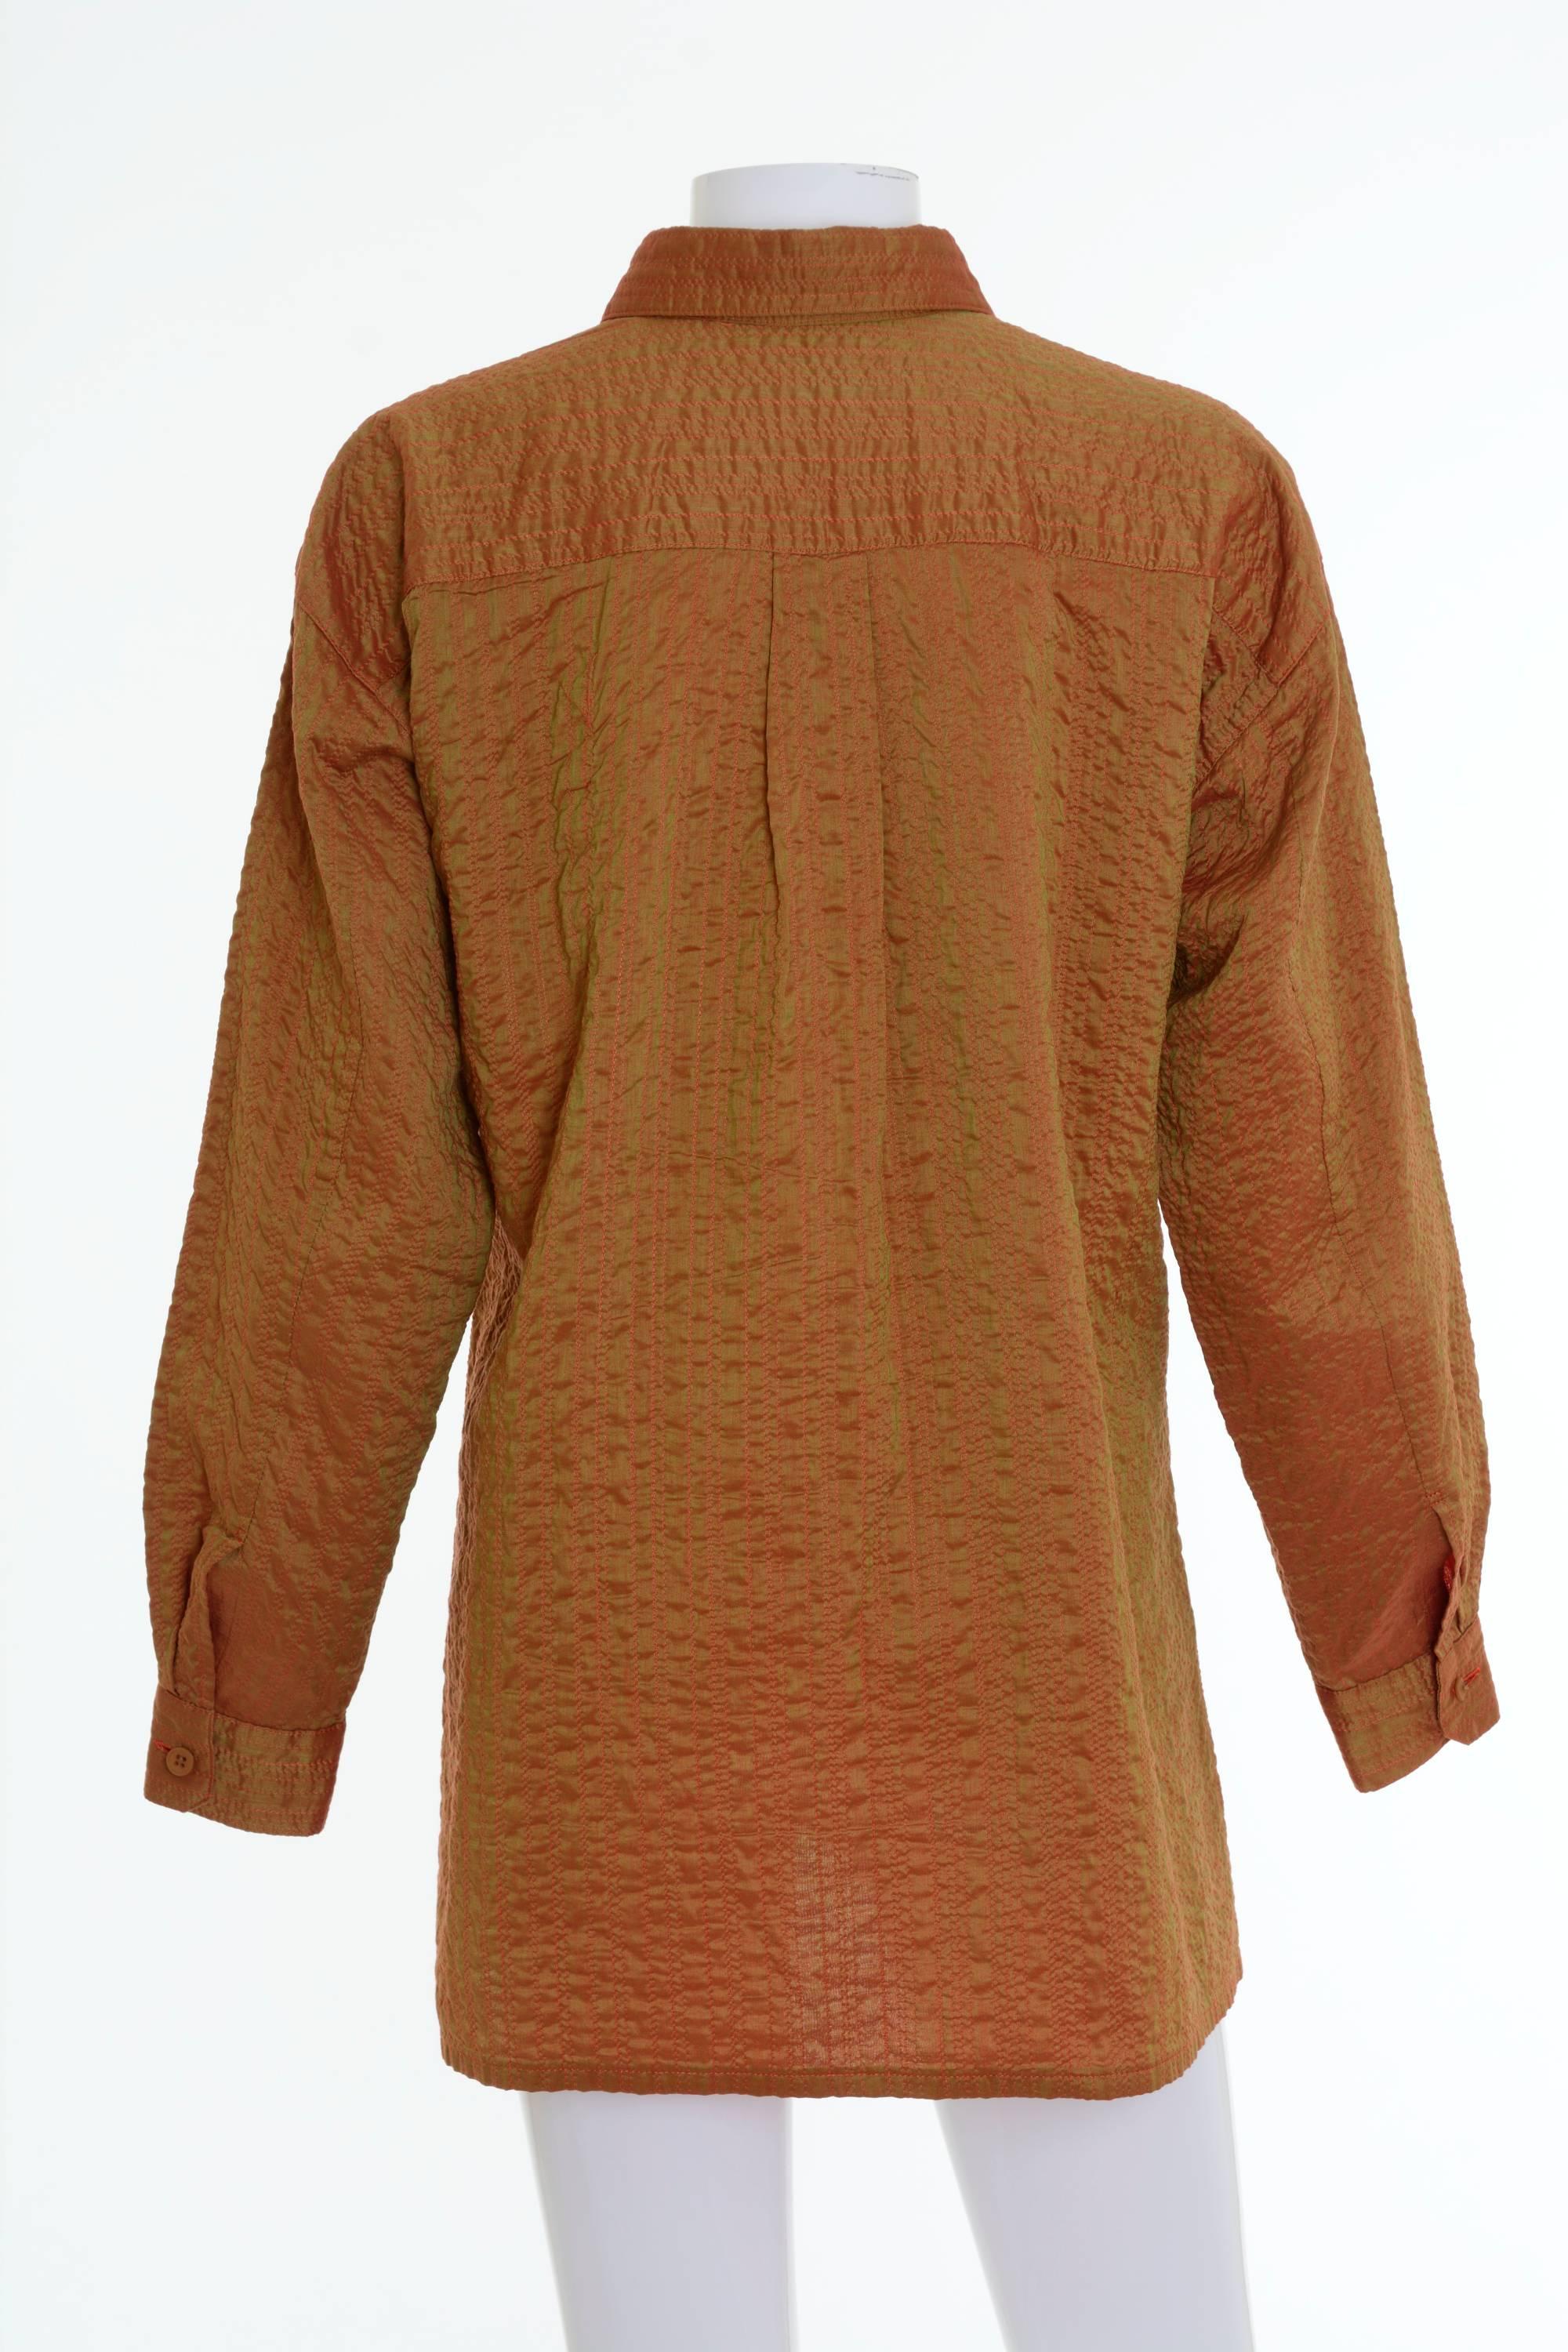 This lovely Issey Miyake shirt is in a rust base fabric with gold-clor design stamped on it that makes it appear like a copper color and orange stitching and interior. It has long sleeves, side vents and one frontal pocket. 

Excellent vintage